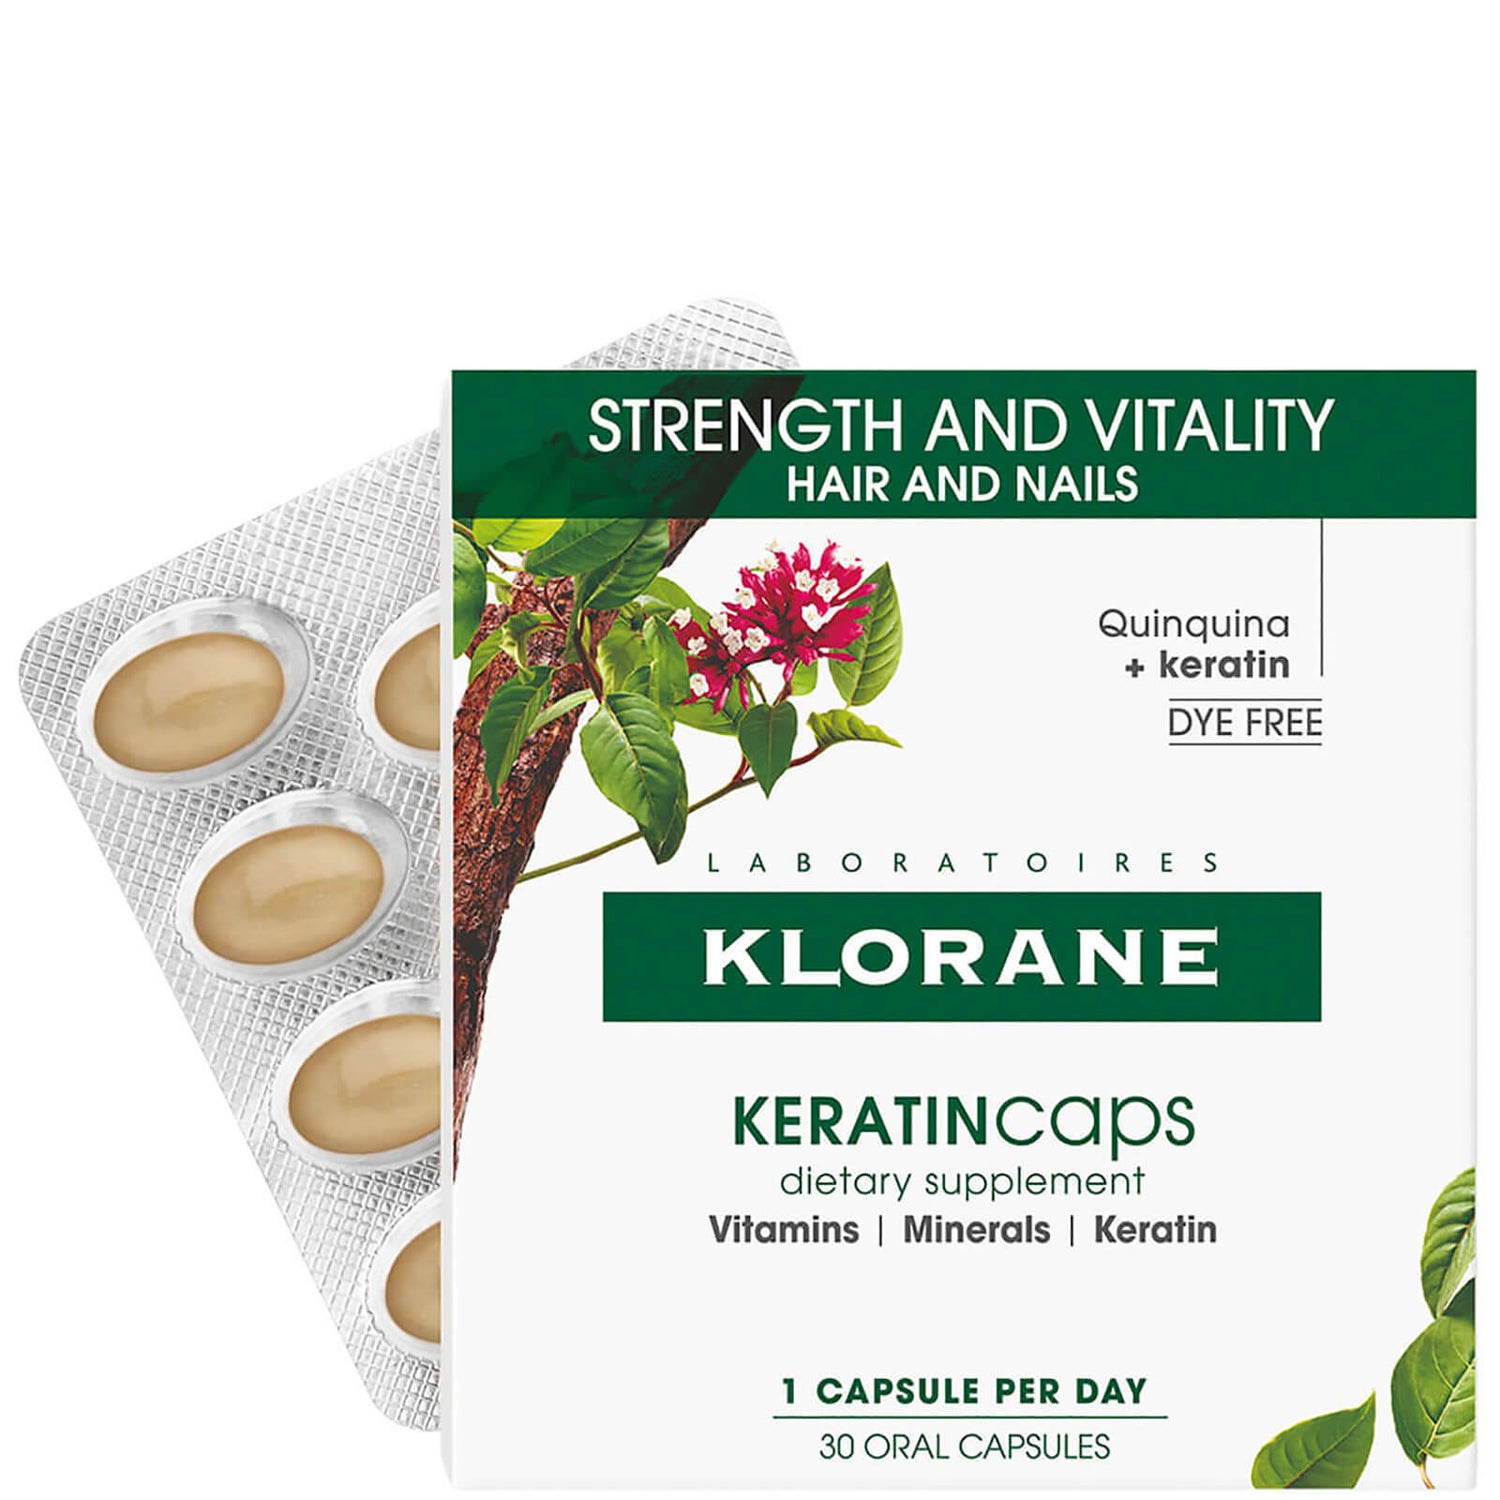 KLORANE Hair and Nail Supplement Caps with Keratin for Healthy Hair 30 days  - LOOKFANTASTIC